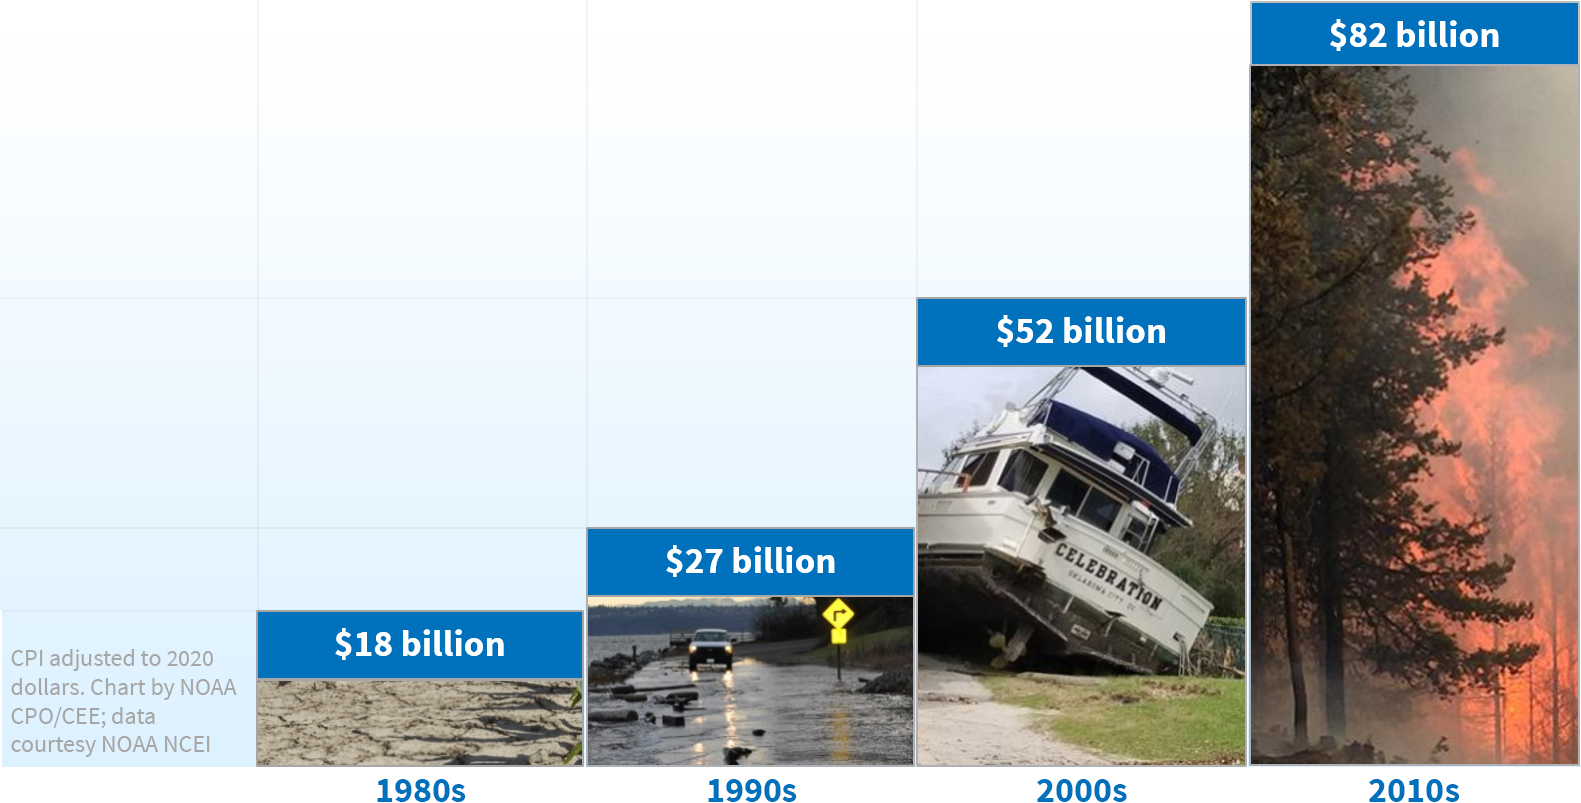 Graphic illustrating the average annual cost of damages per decade. Average annual damages have more than quadrupled since the 1980s, from about $18 billion per year in the 1980s to about $82 billion per year in the 2010s. 